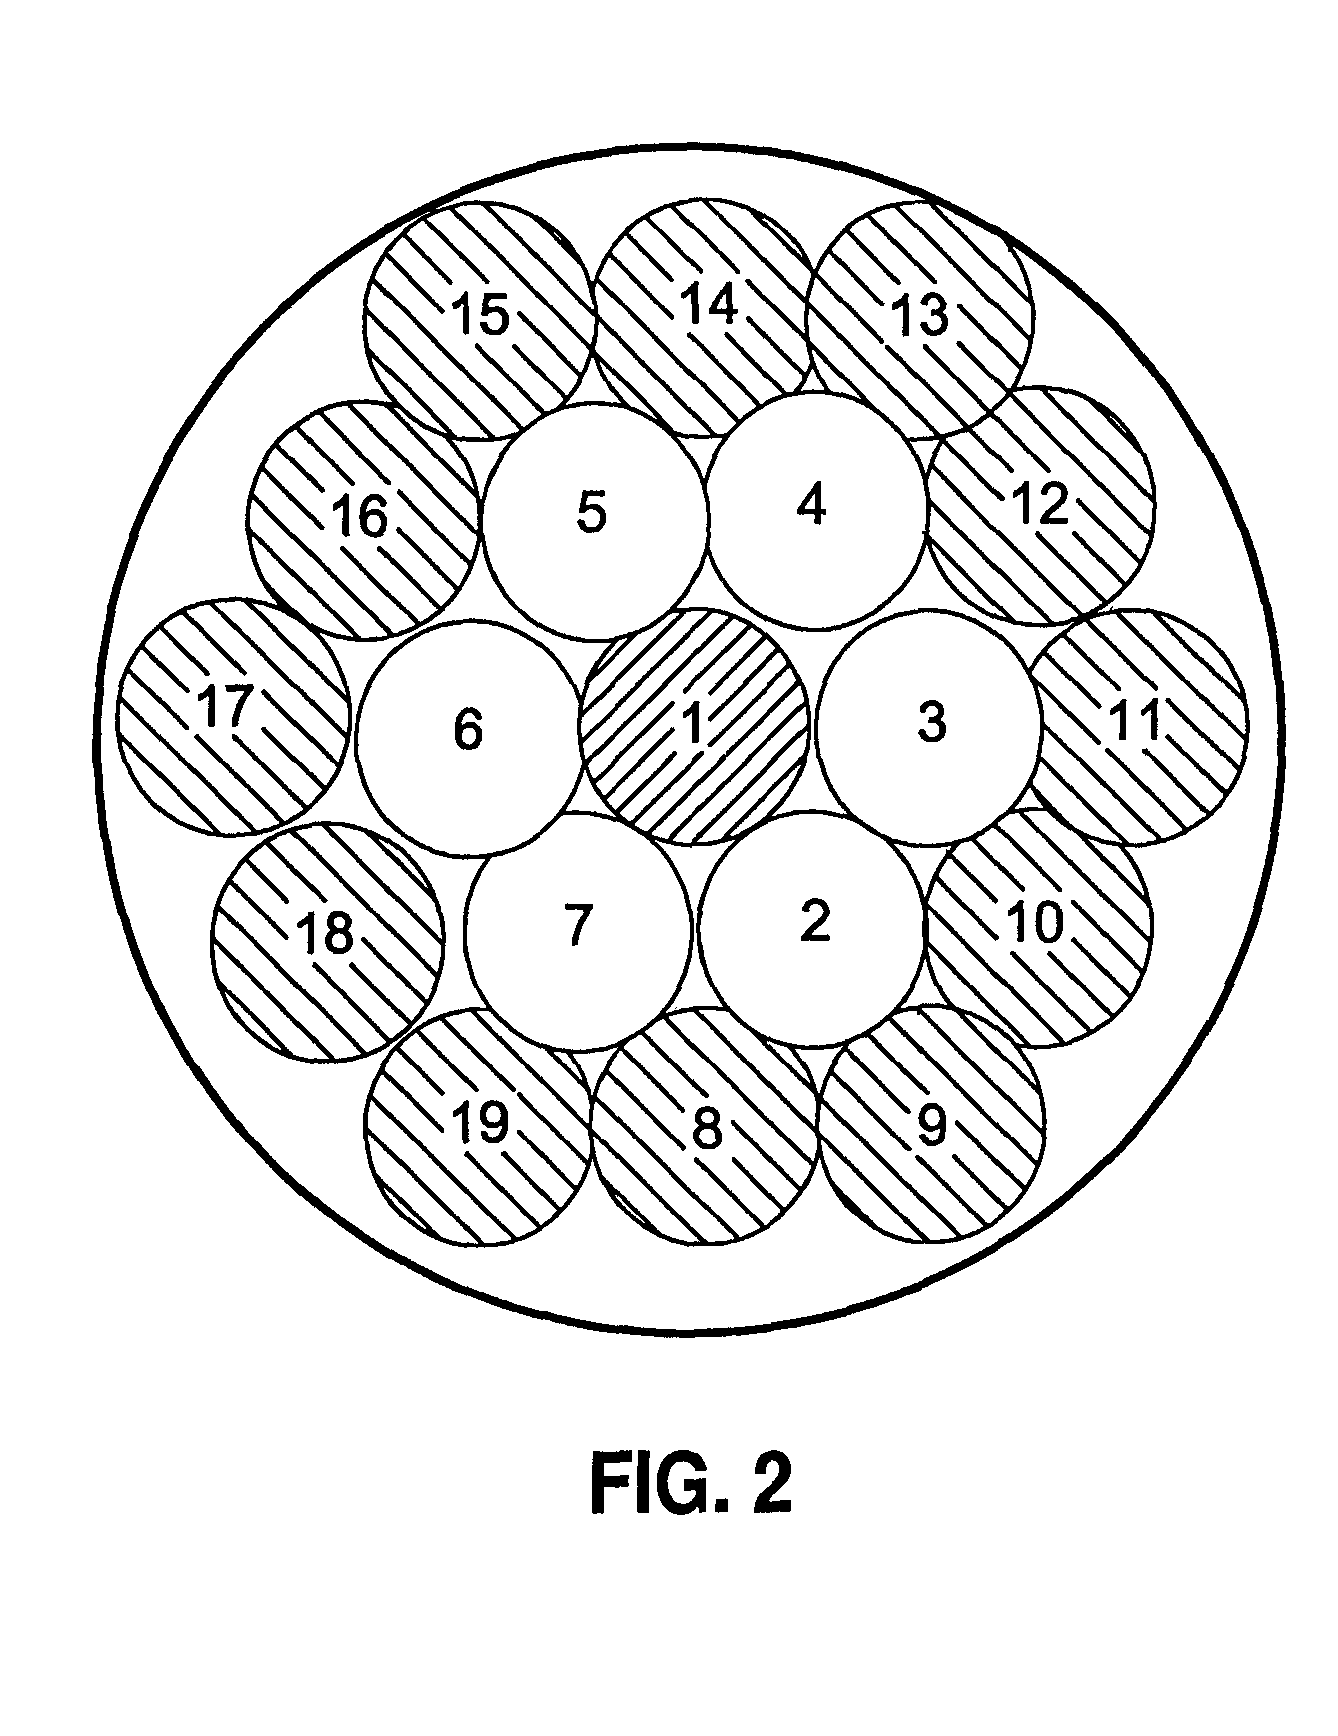 Antenna system for producing variable-size beams